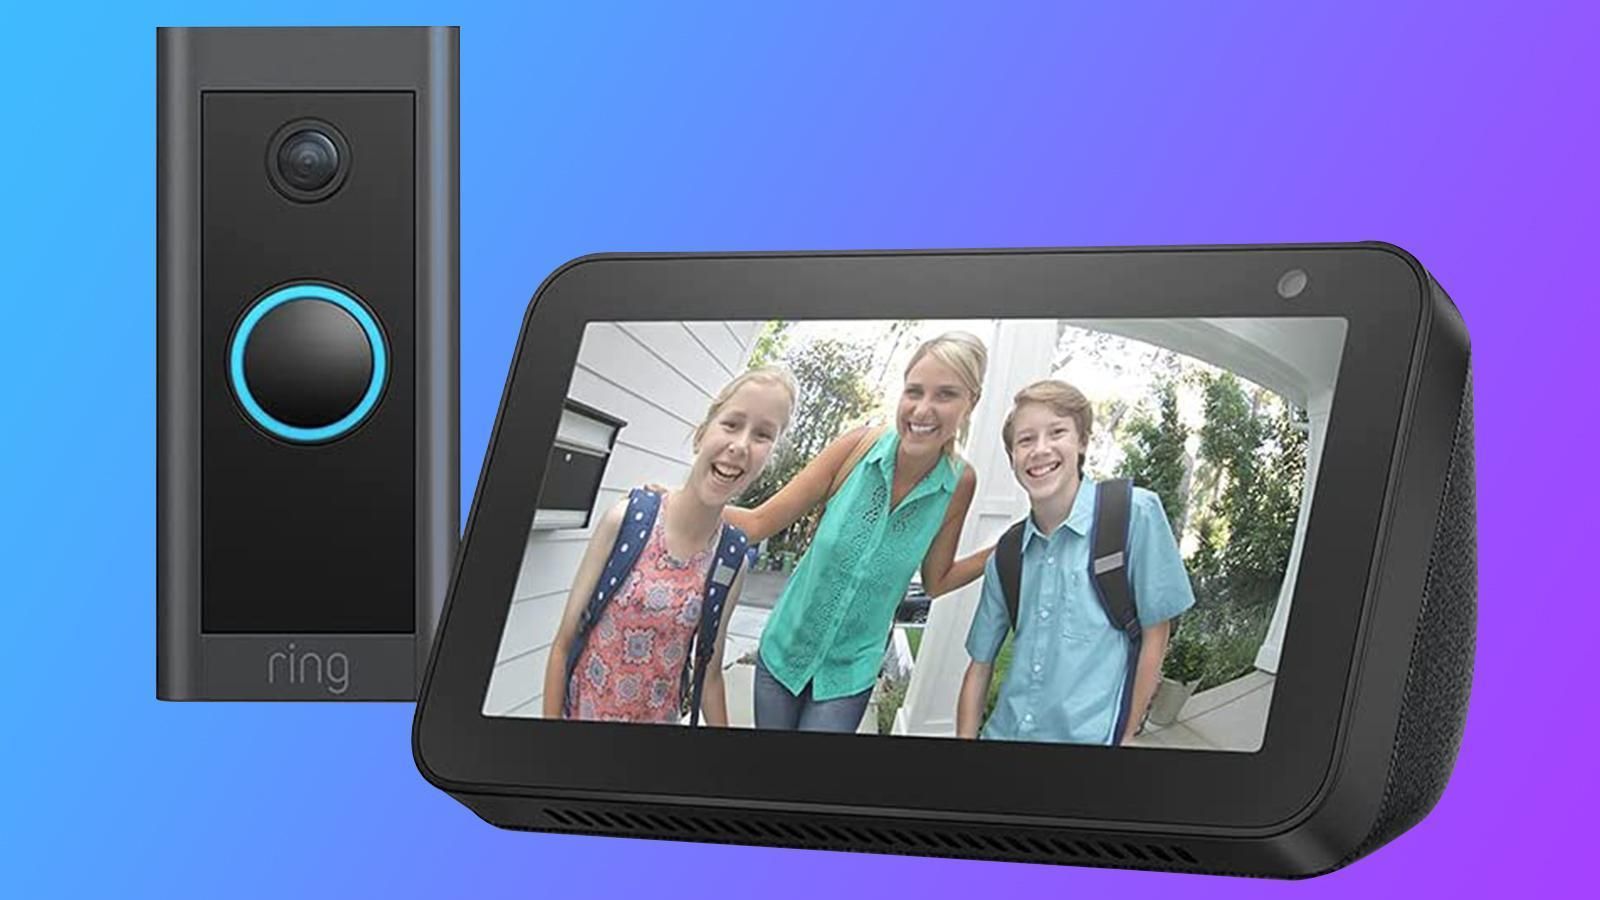 A ring doorbell with a picture of three children on it